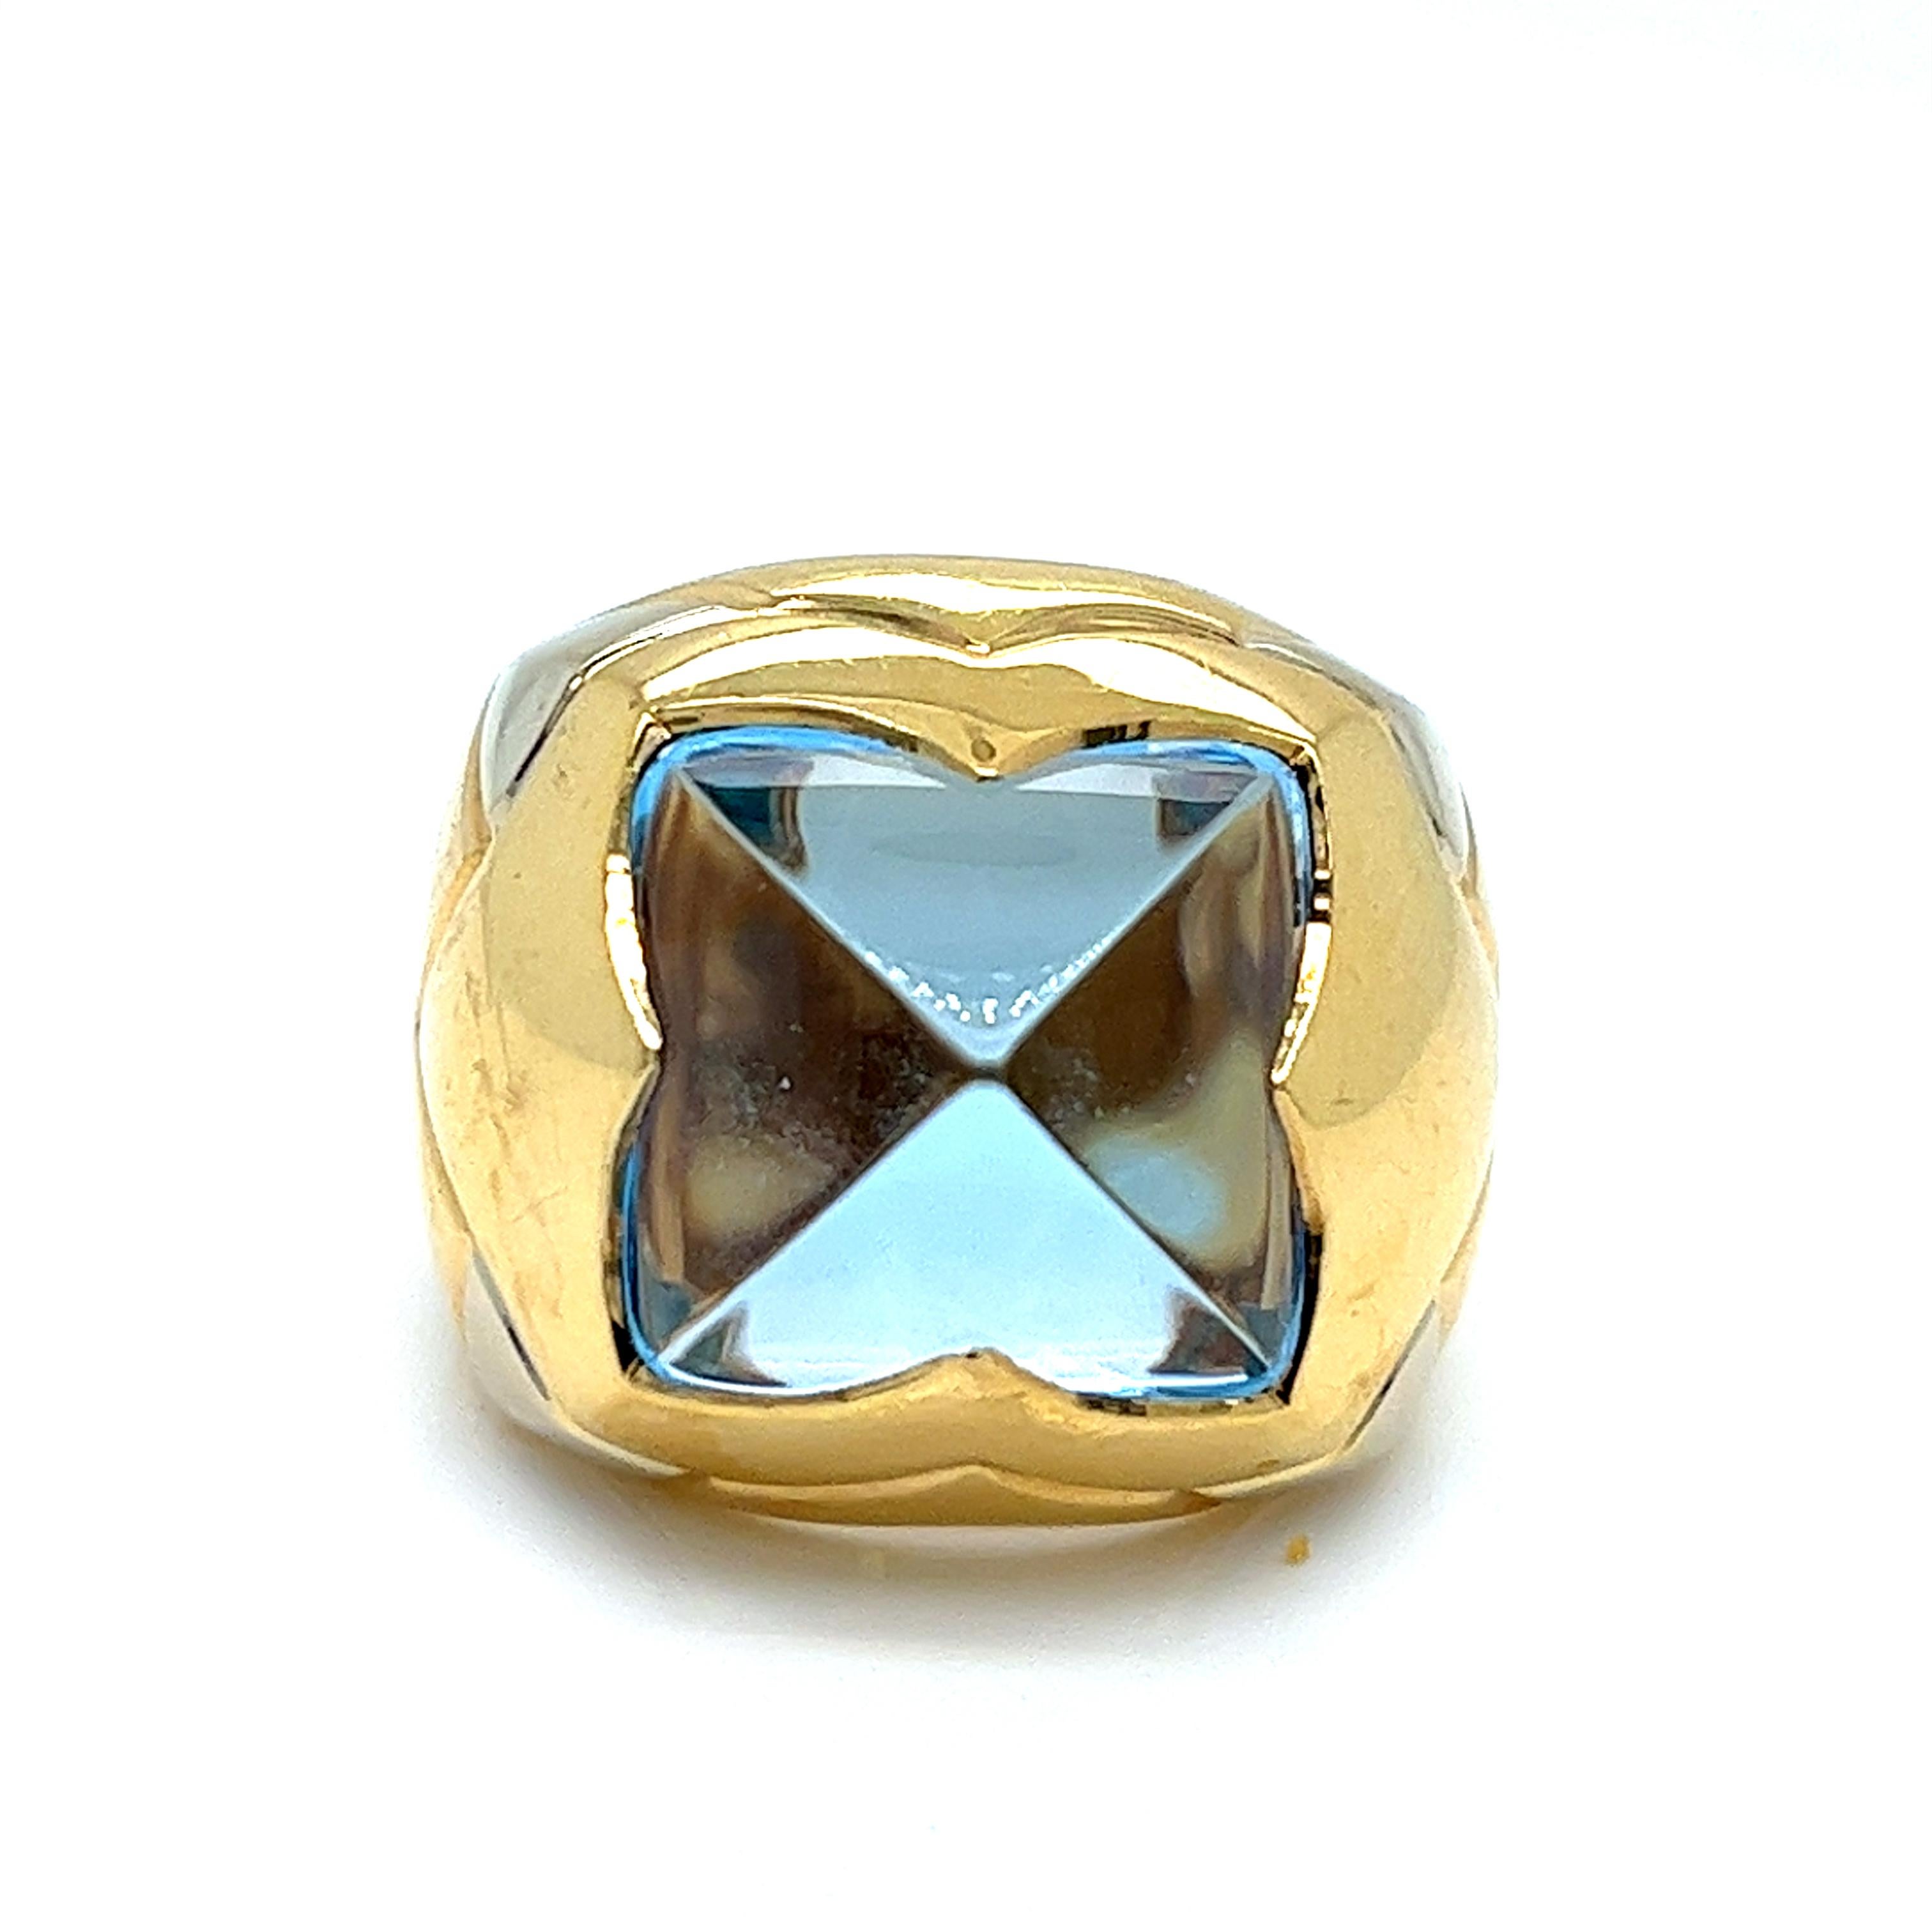 Bvlgari  Pyramid Clips Earrings Ring and Pendant 18Kt gold & carved Blue Topaz For Sale 1